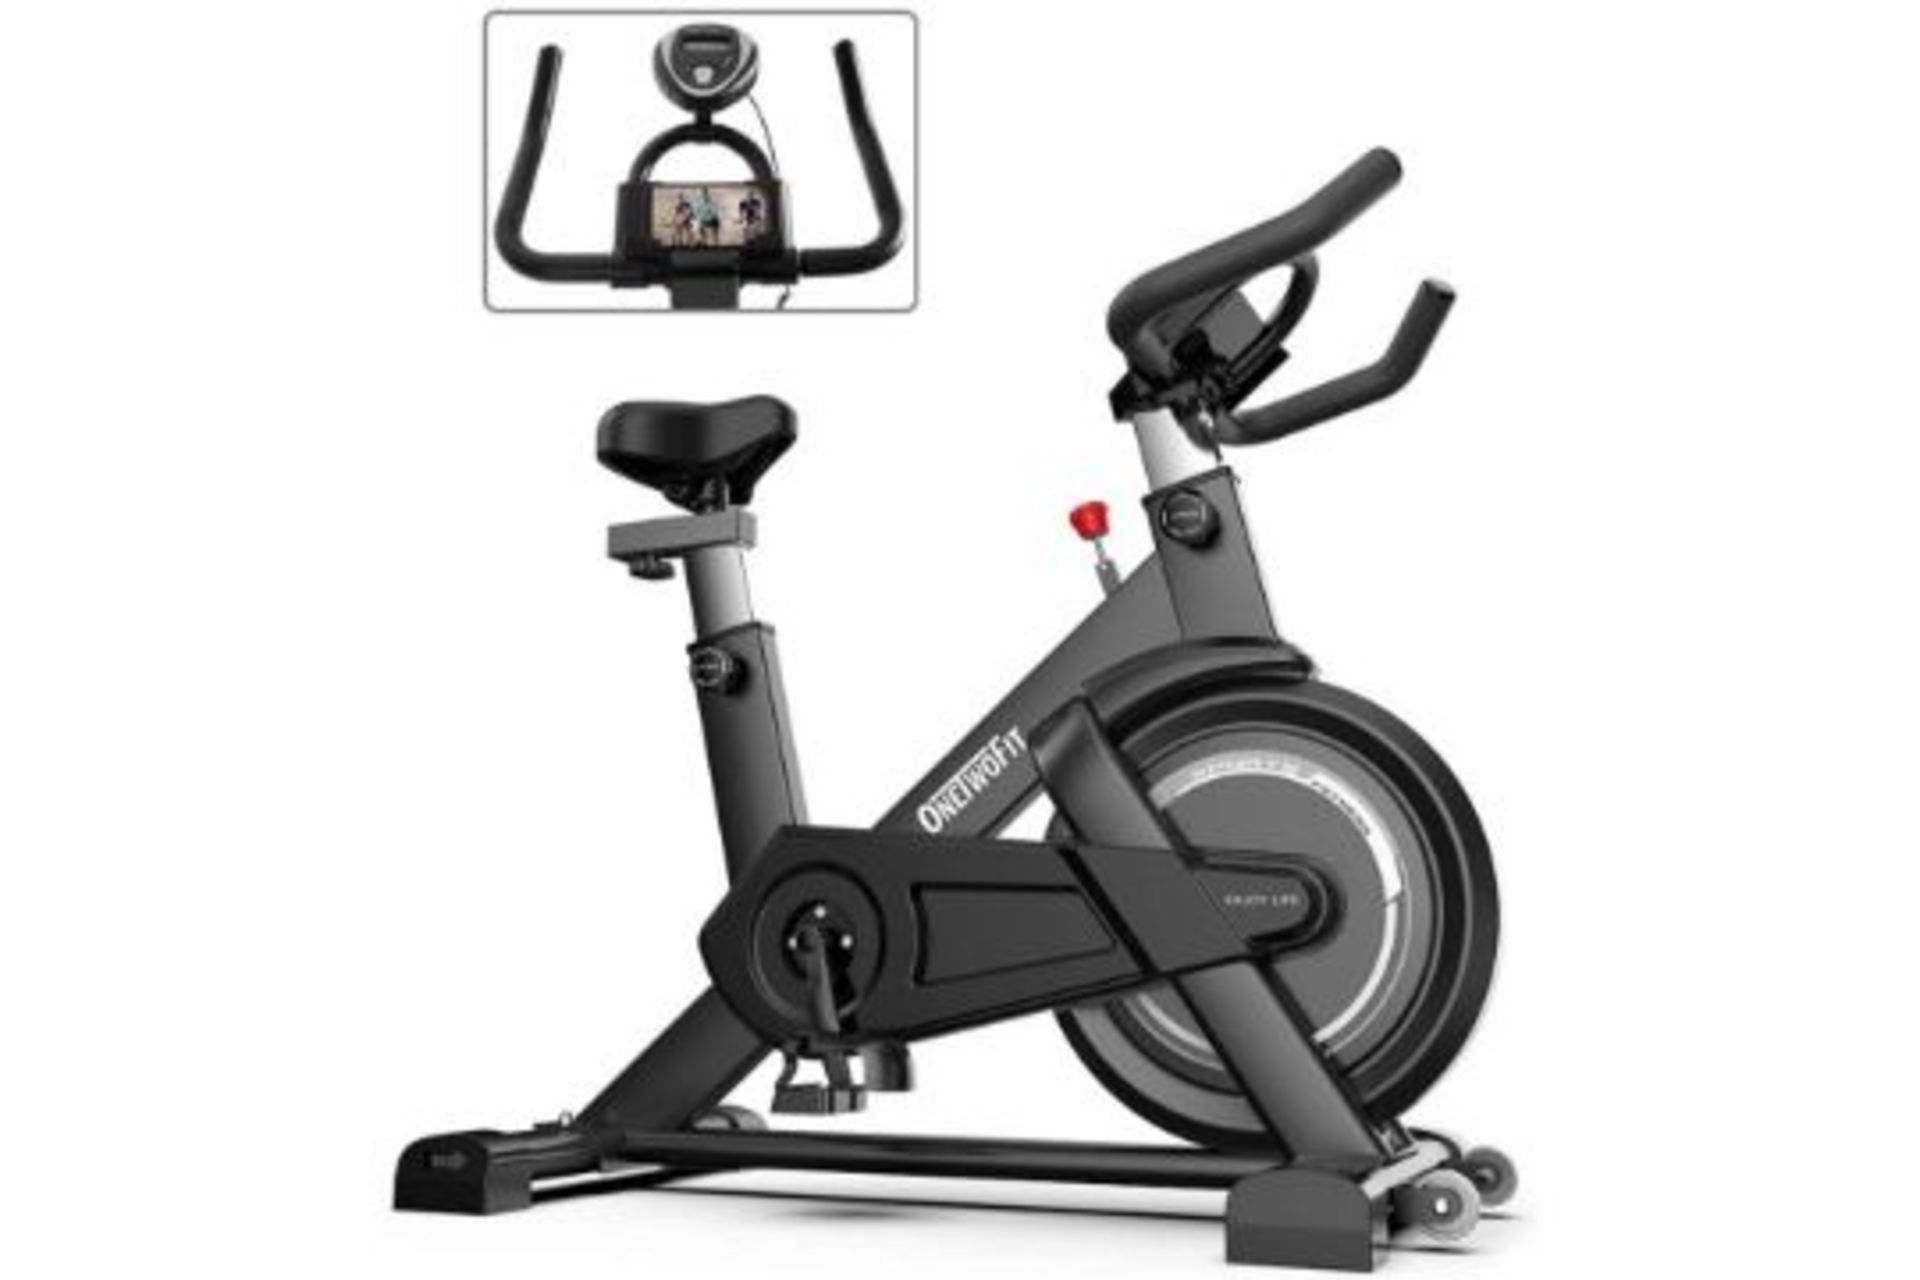 BRAND NEW GREY ONETWOFIT EXERCISE BIKE, CARDIO SPINNING BIKE WITH ADJUSTABLE HANDLEBAR AND SEAT, LCD - Image 2 of 3